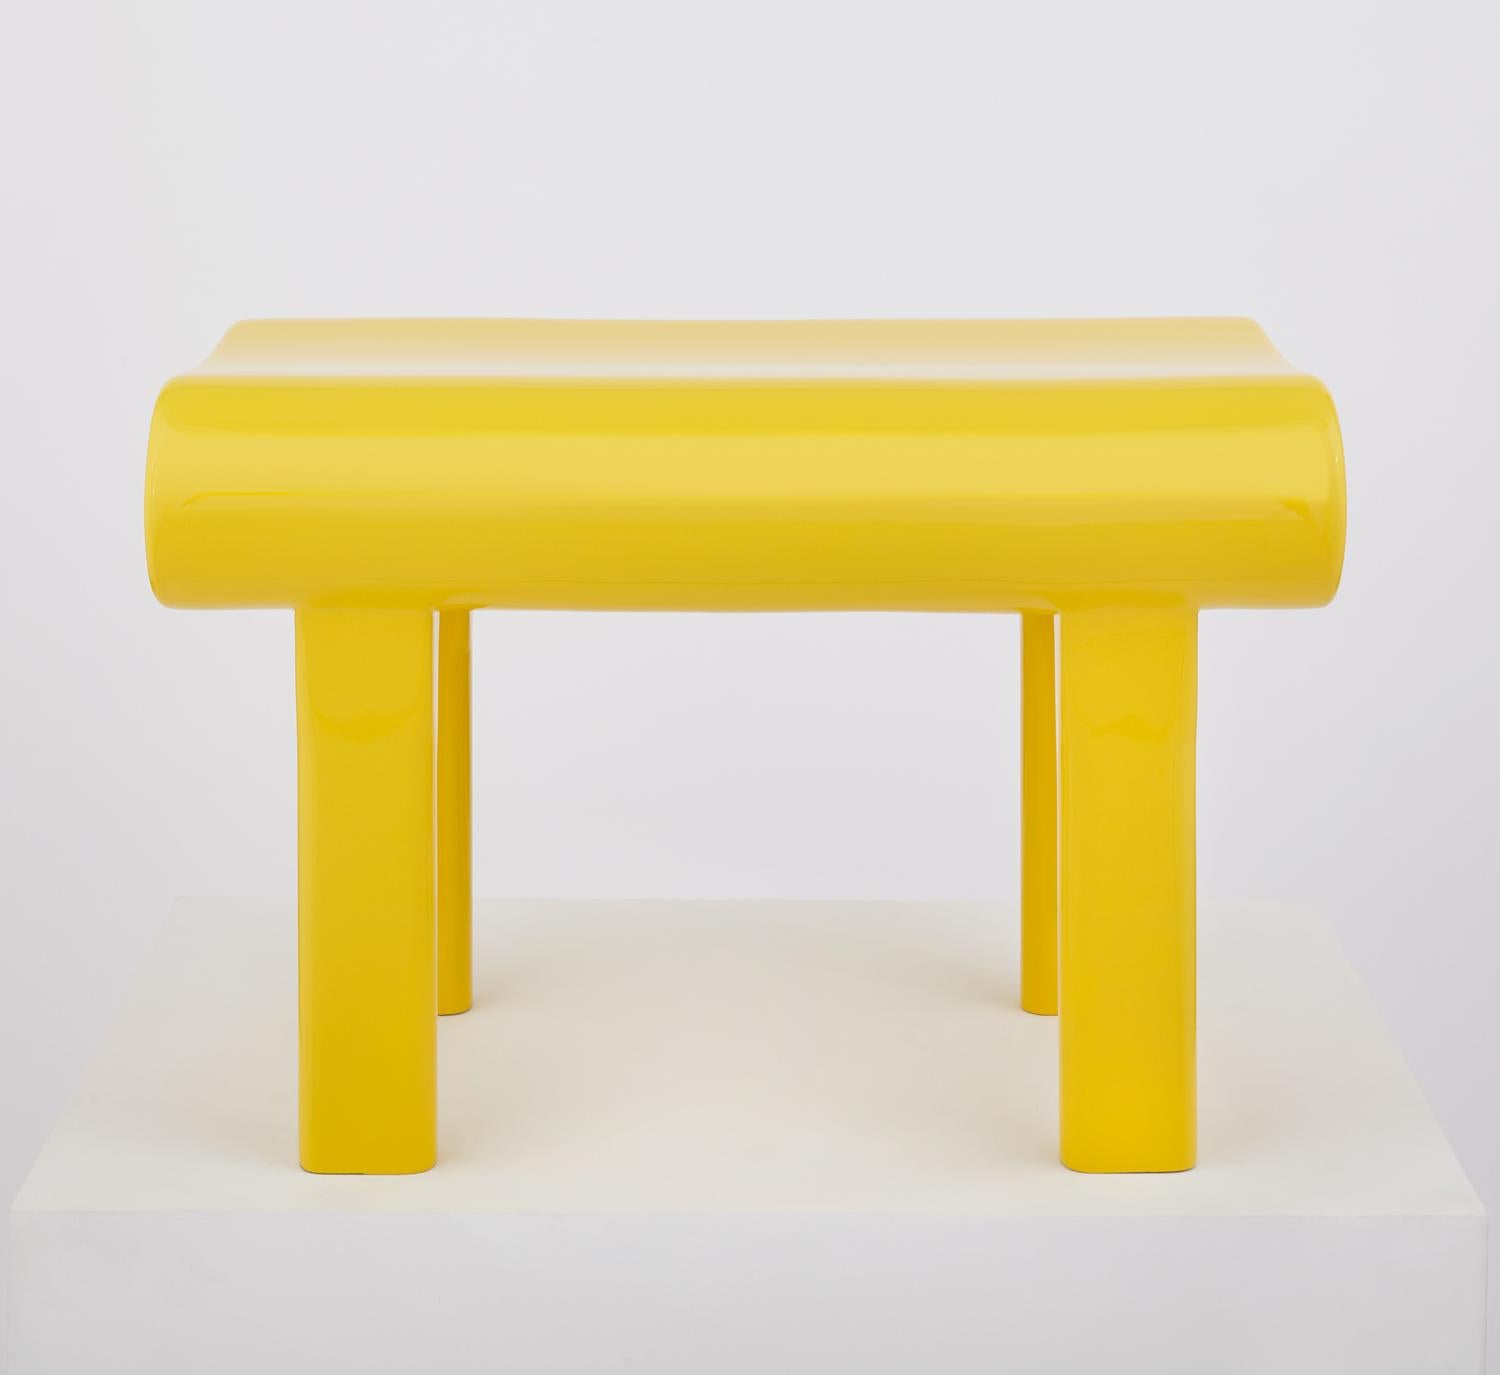 Contemporary sculpted yellow wood bench with acrylic finish. Each bench is constructed from solid beech and coated with a gloss acrylic finish. Designed by Zelonky Studios, An instant Minimalist icon, joining the pantheon of iconic Minimalist